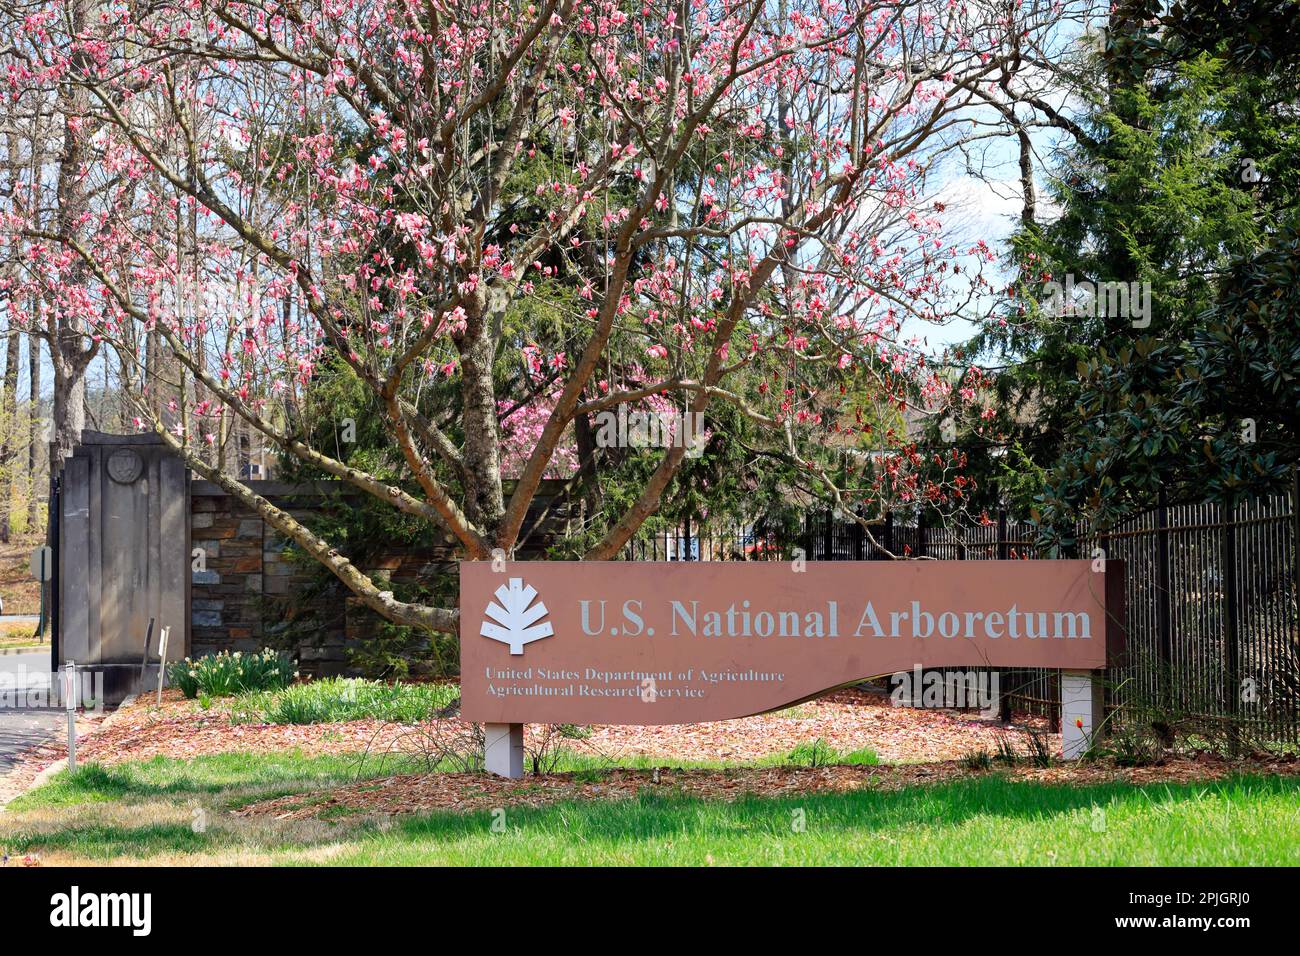 A magnolia tree behind the signage for the US National Arboretum, Washington DC. The park is operated by the USDA Agricultural Research Service. Stock Photo